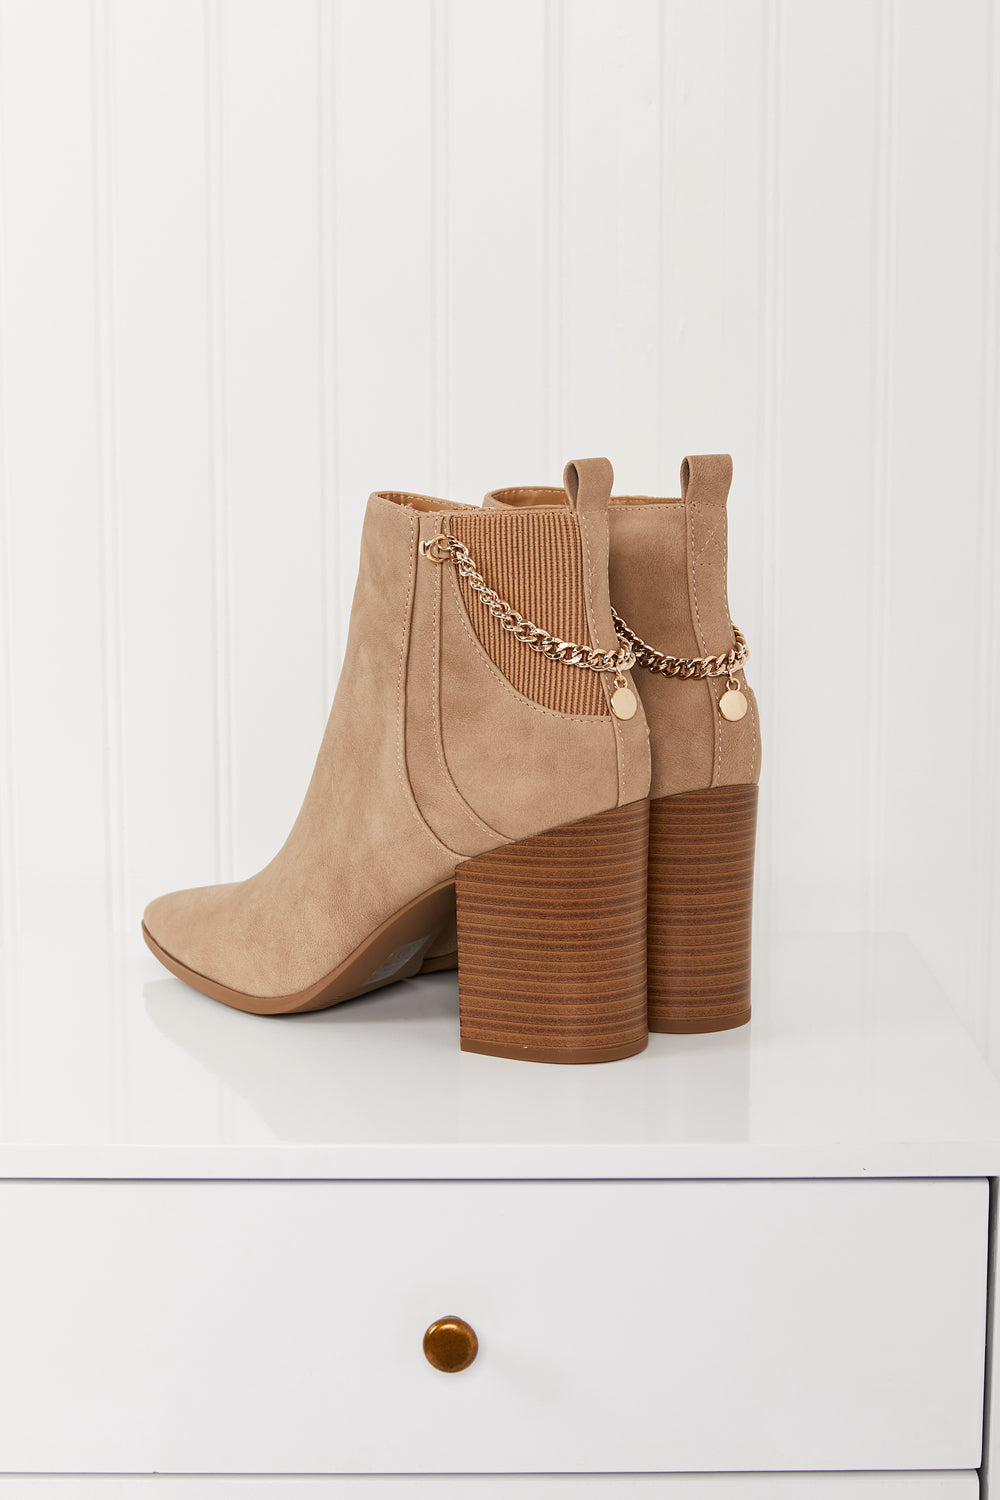 Fortune Dynamic Date Night Dreams Elastic Back Chain Detail Booties